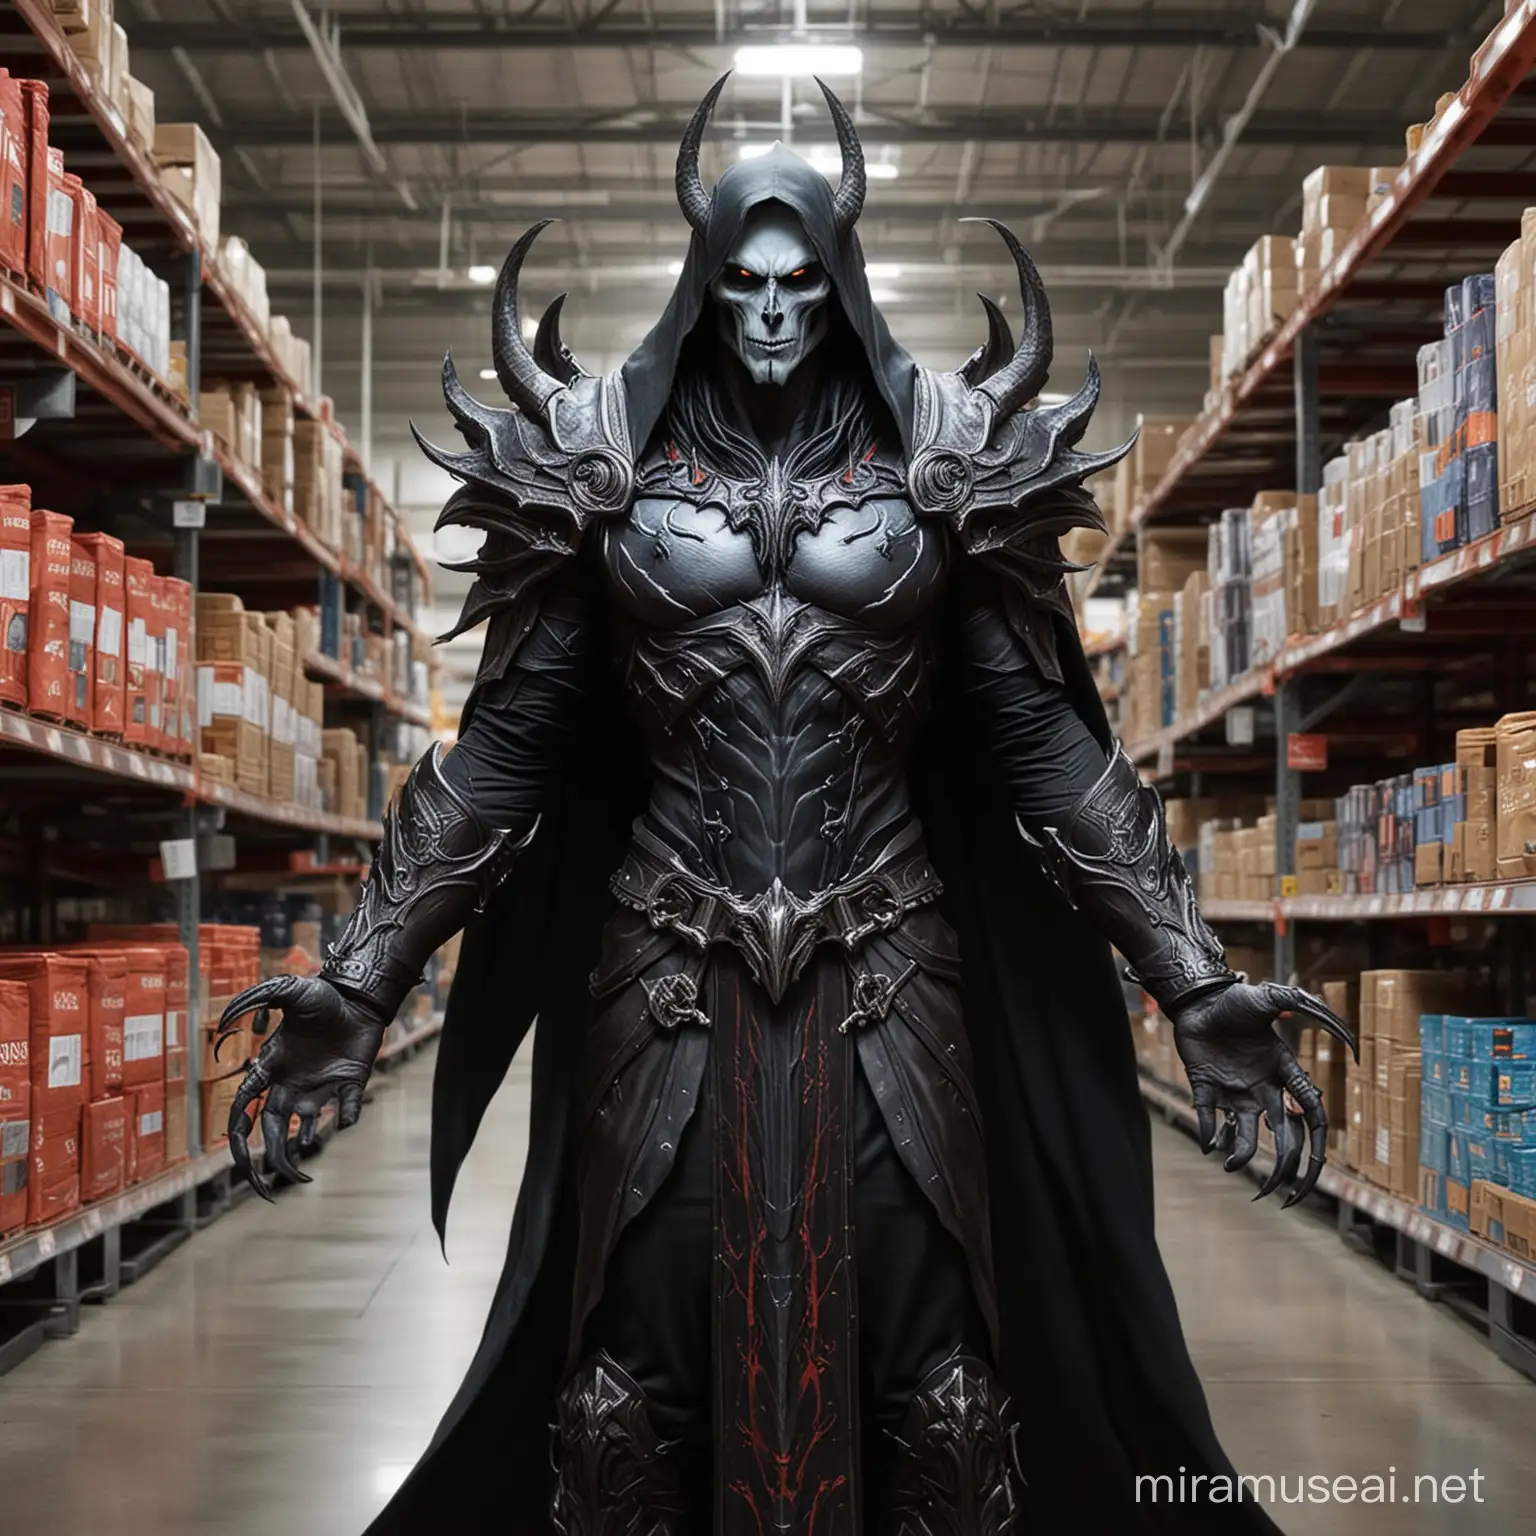 Malthael the Archangel of Death Working at Costco in a Diablo Crossover